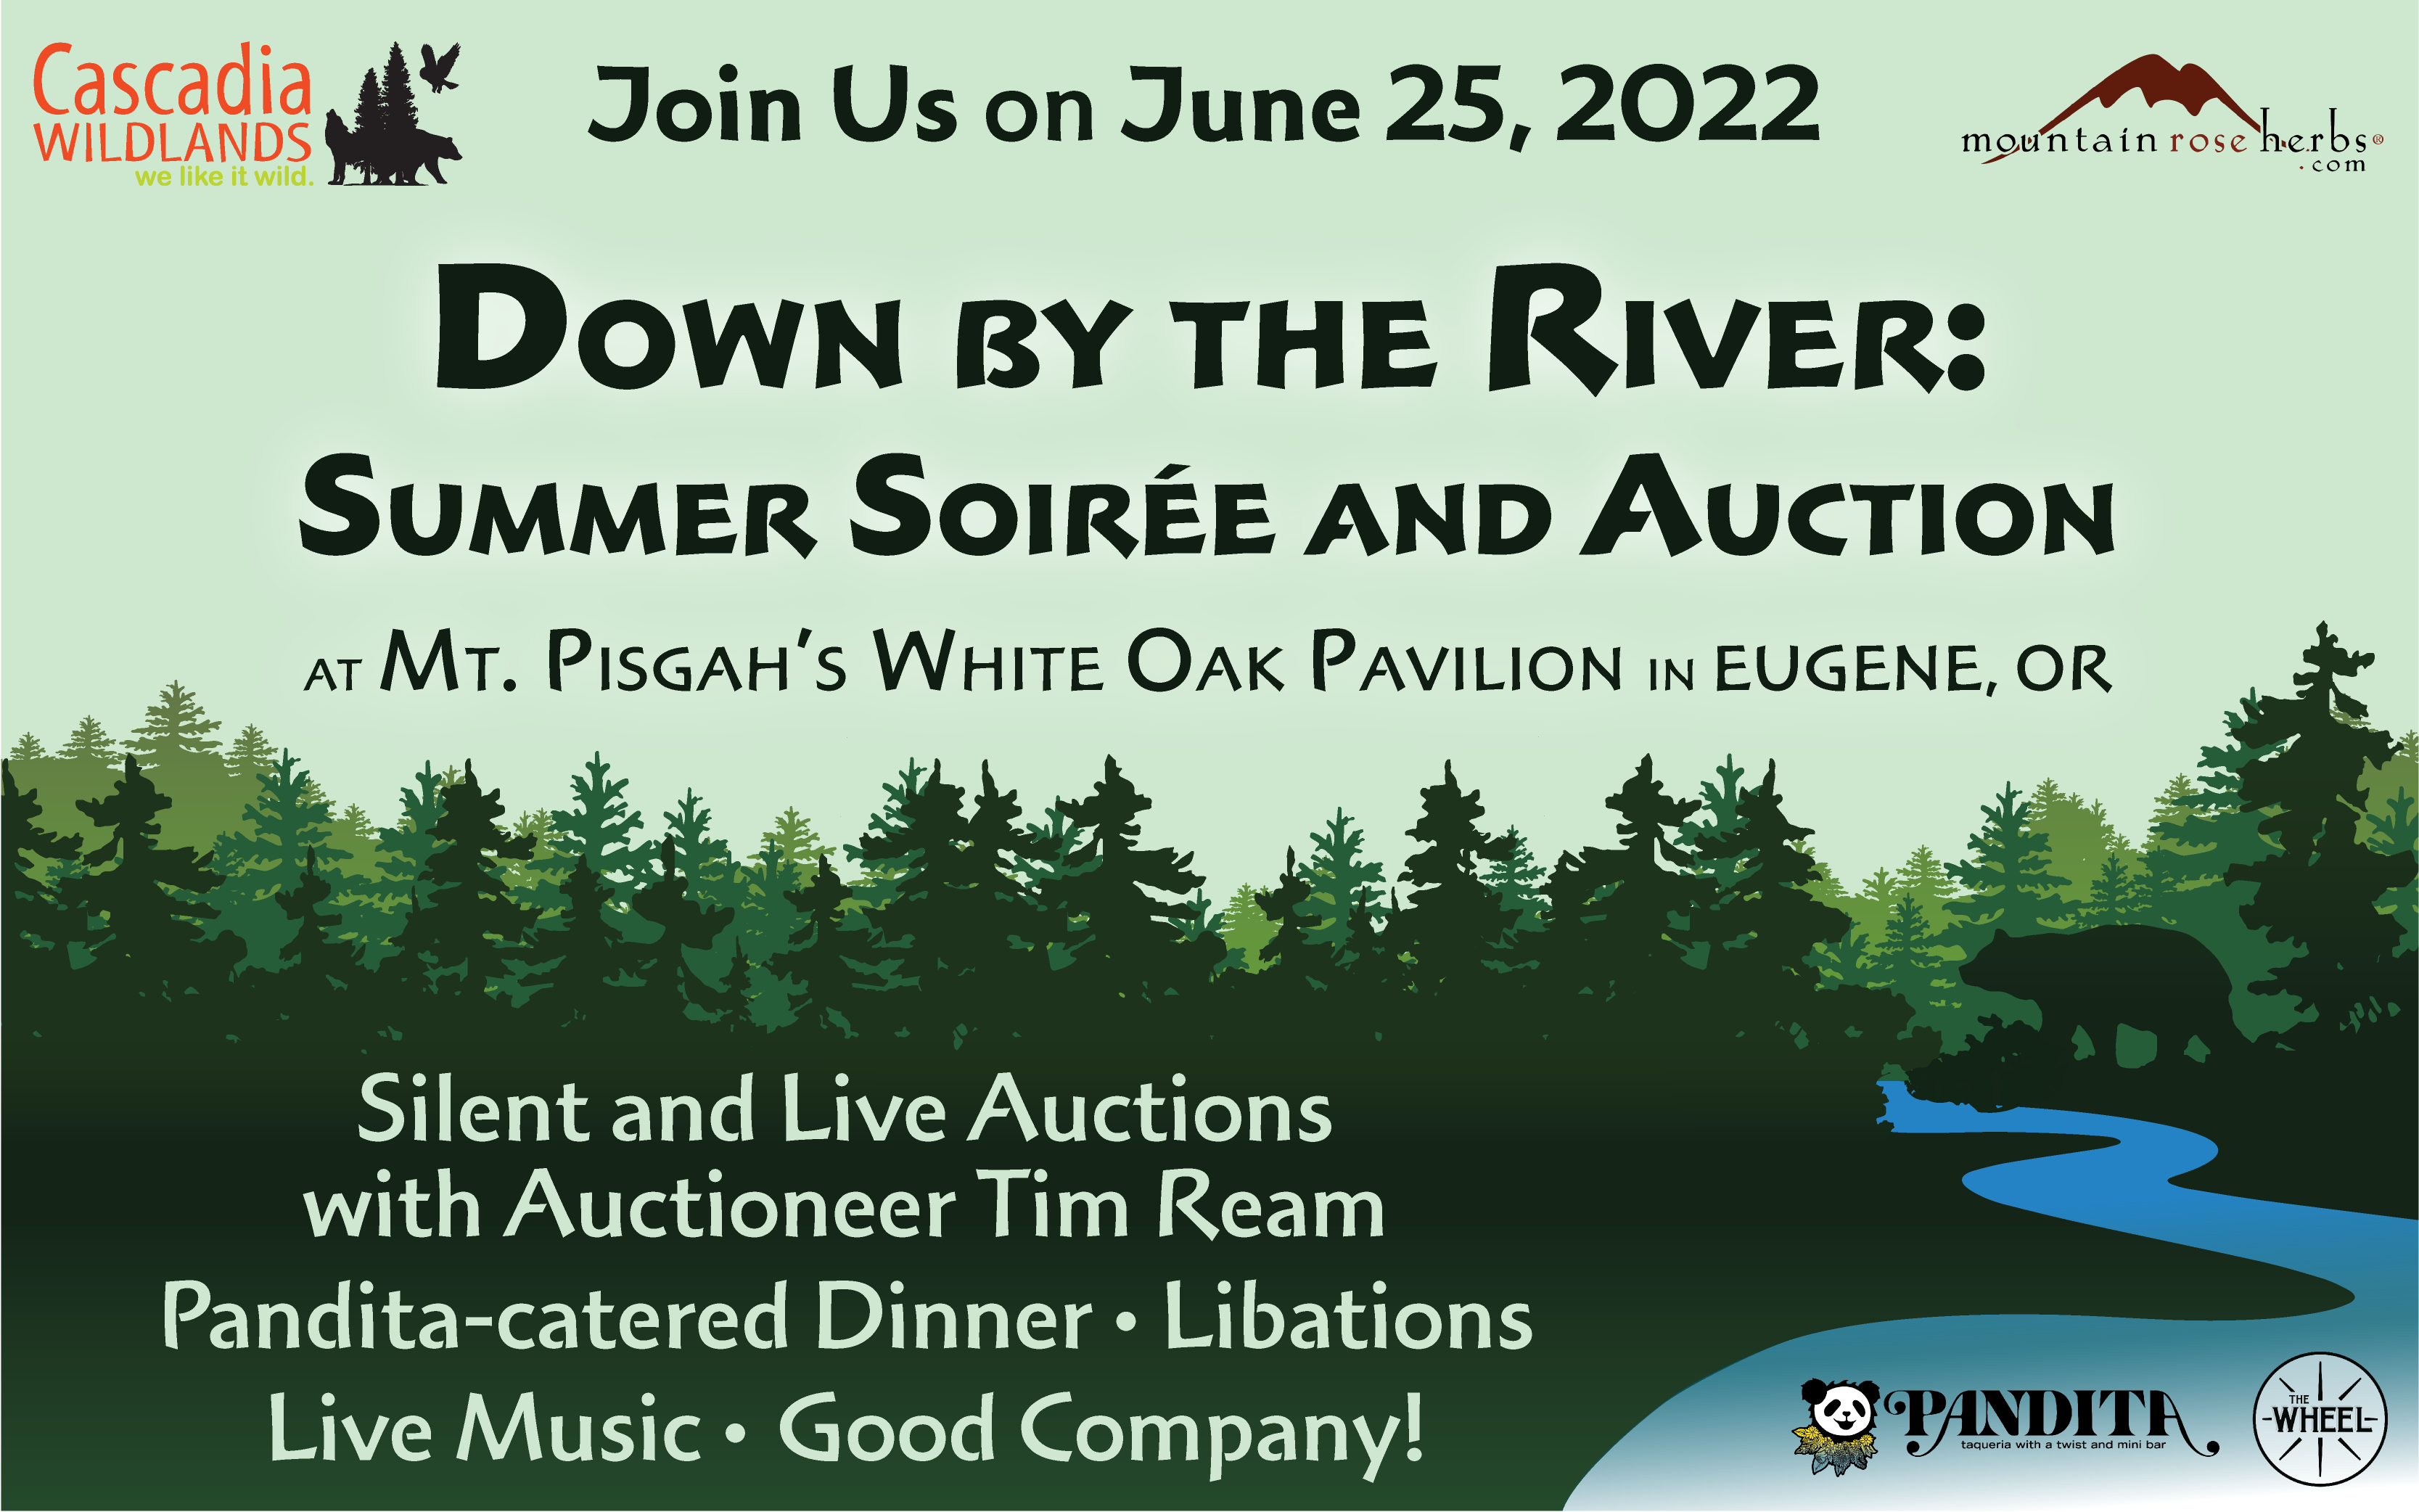 Down By the River: Summer Soirée and Auction – June 25, 2022